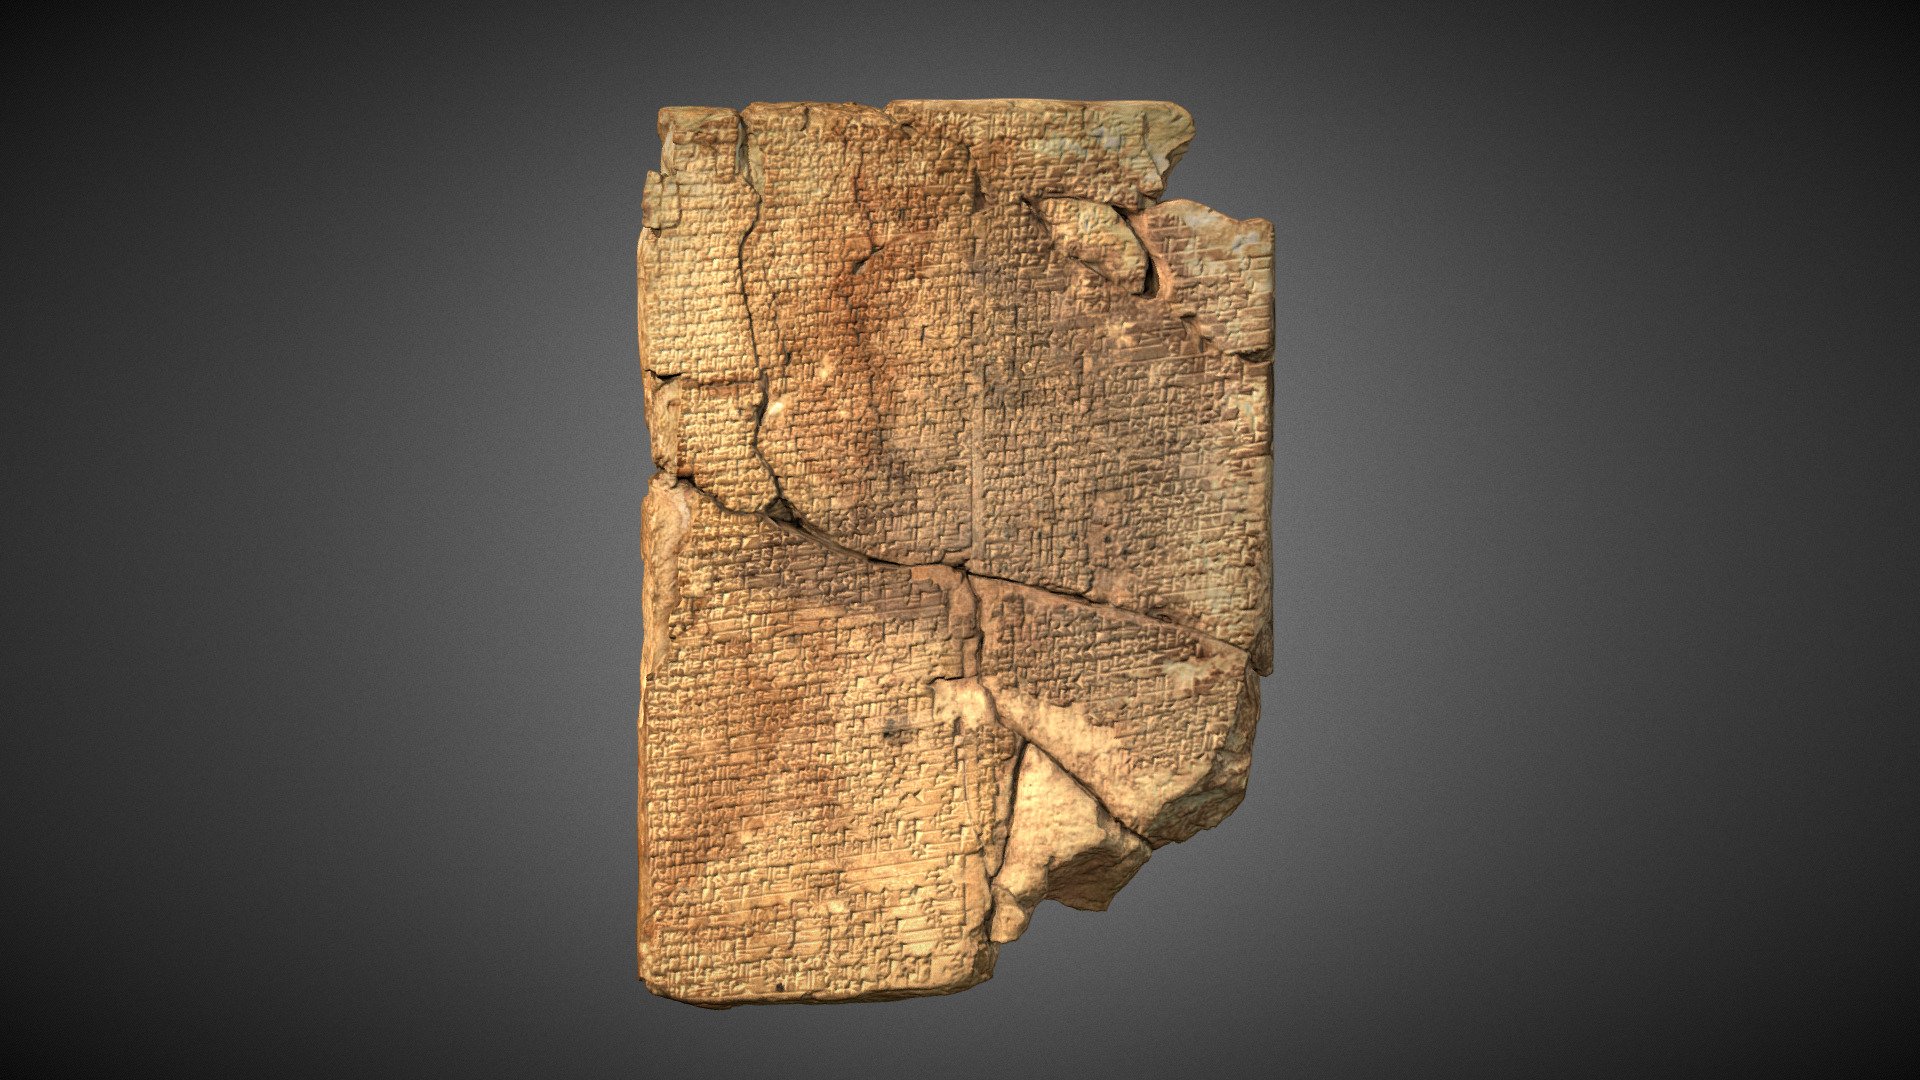 Old Babylonian culinary tablet with the remnants of very detailed Akkadian instructions for seven recipes.

Yale Peabody Museum of Natural History, Yale Babylonian Collection, Catalog No. BC.023013 (Original Catalog No. YBC 8958)

3D featured in the installation The oldest recipes of the world or the beauty of tradition in the exhibit Ik kook, dus ik ben. / I cook, therefore I am. at Wereldmuseum Rotterdam 30 February - 30 July 2017. For a glimpse, please see Zcene's videos: Videomapping in het Wereldmuseum Rotterdam; Wereldmuseum - Over het eerste recept; Videomapping in Wereldmuseum Rotterdam

Scanned and processed by Yale Institute for the Preservation of Cultural 
Heritage Digital Imaging Specialist Chelsea Alene Graham using Artec Space Spider and Artec Studio Professional in 2016. Geometry uploaded at 0.3 mm resolution 3d model